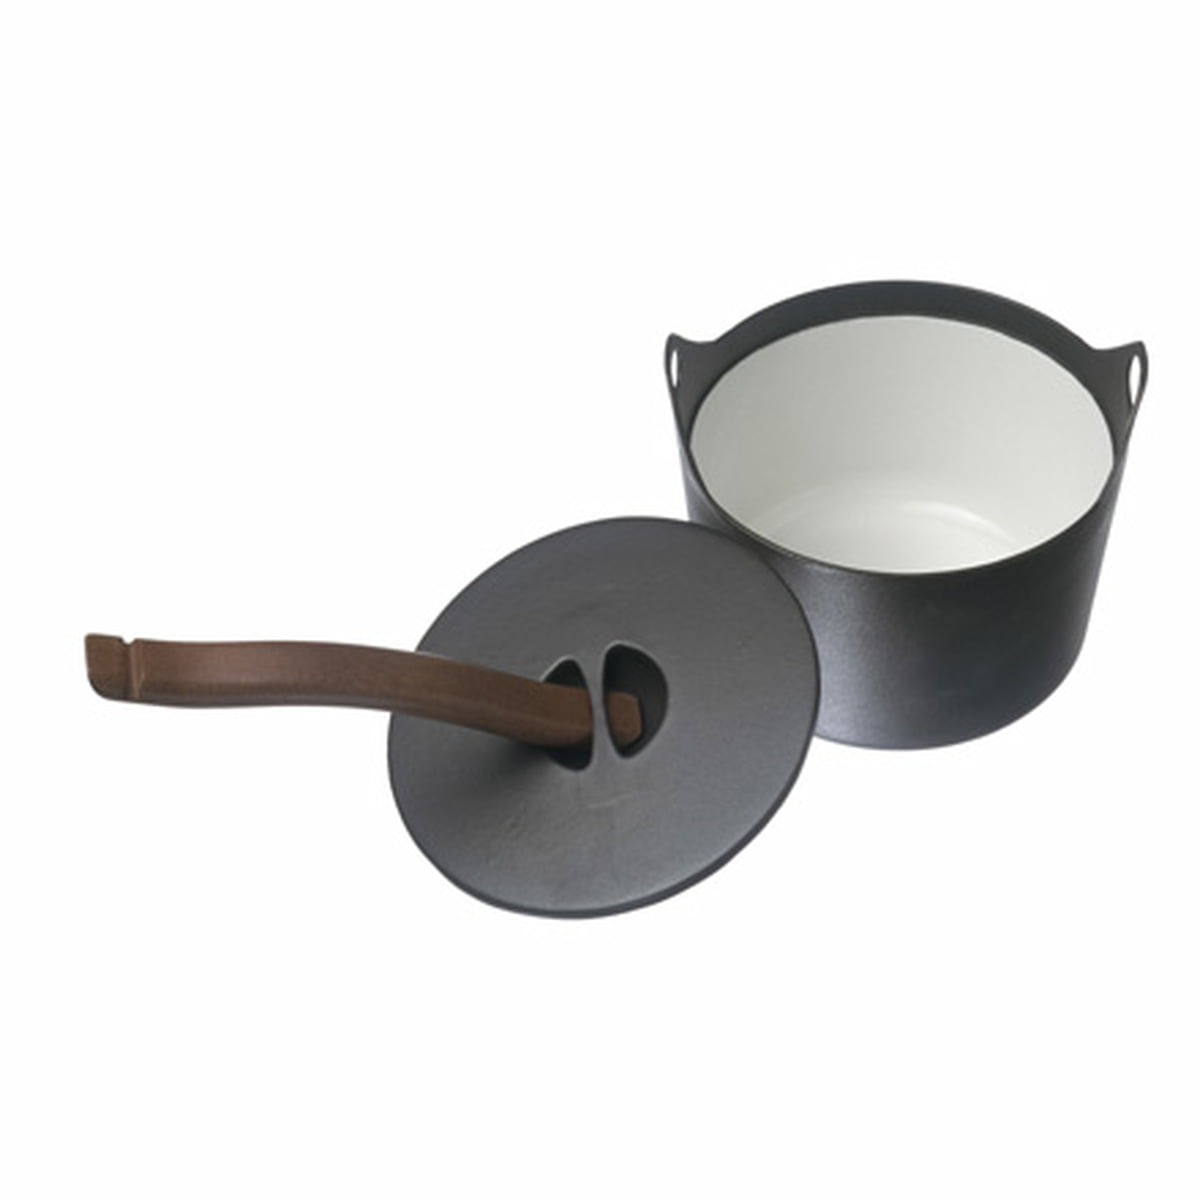 Tools cooking pots by Iittala in the interior design shop